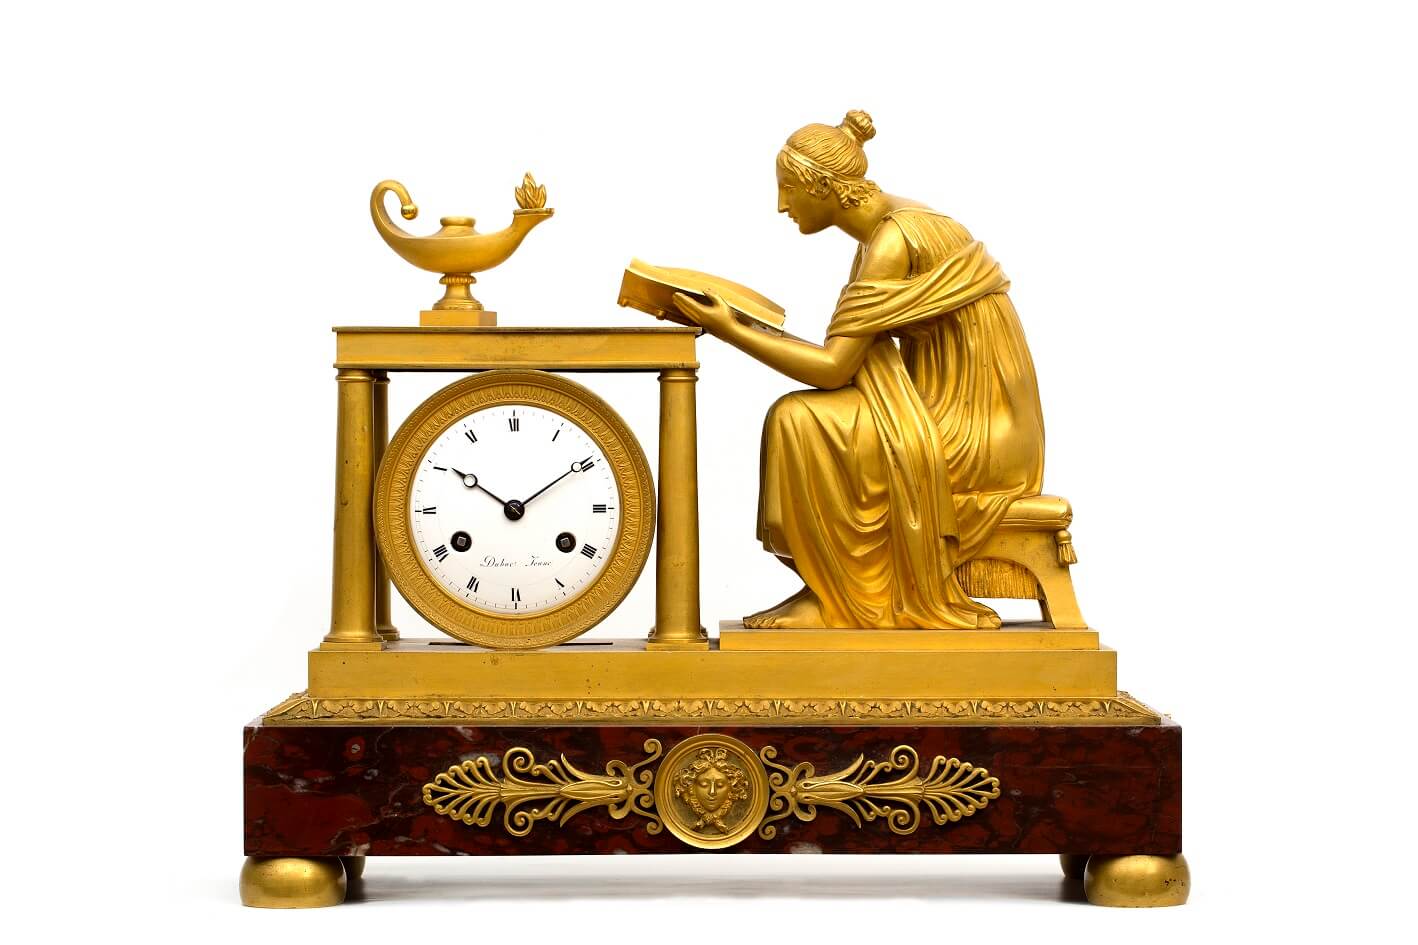 French Empire ormolu griotte rouge mantel clock Sappho 1800